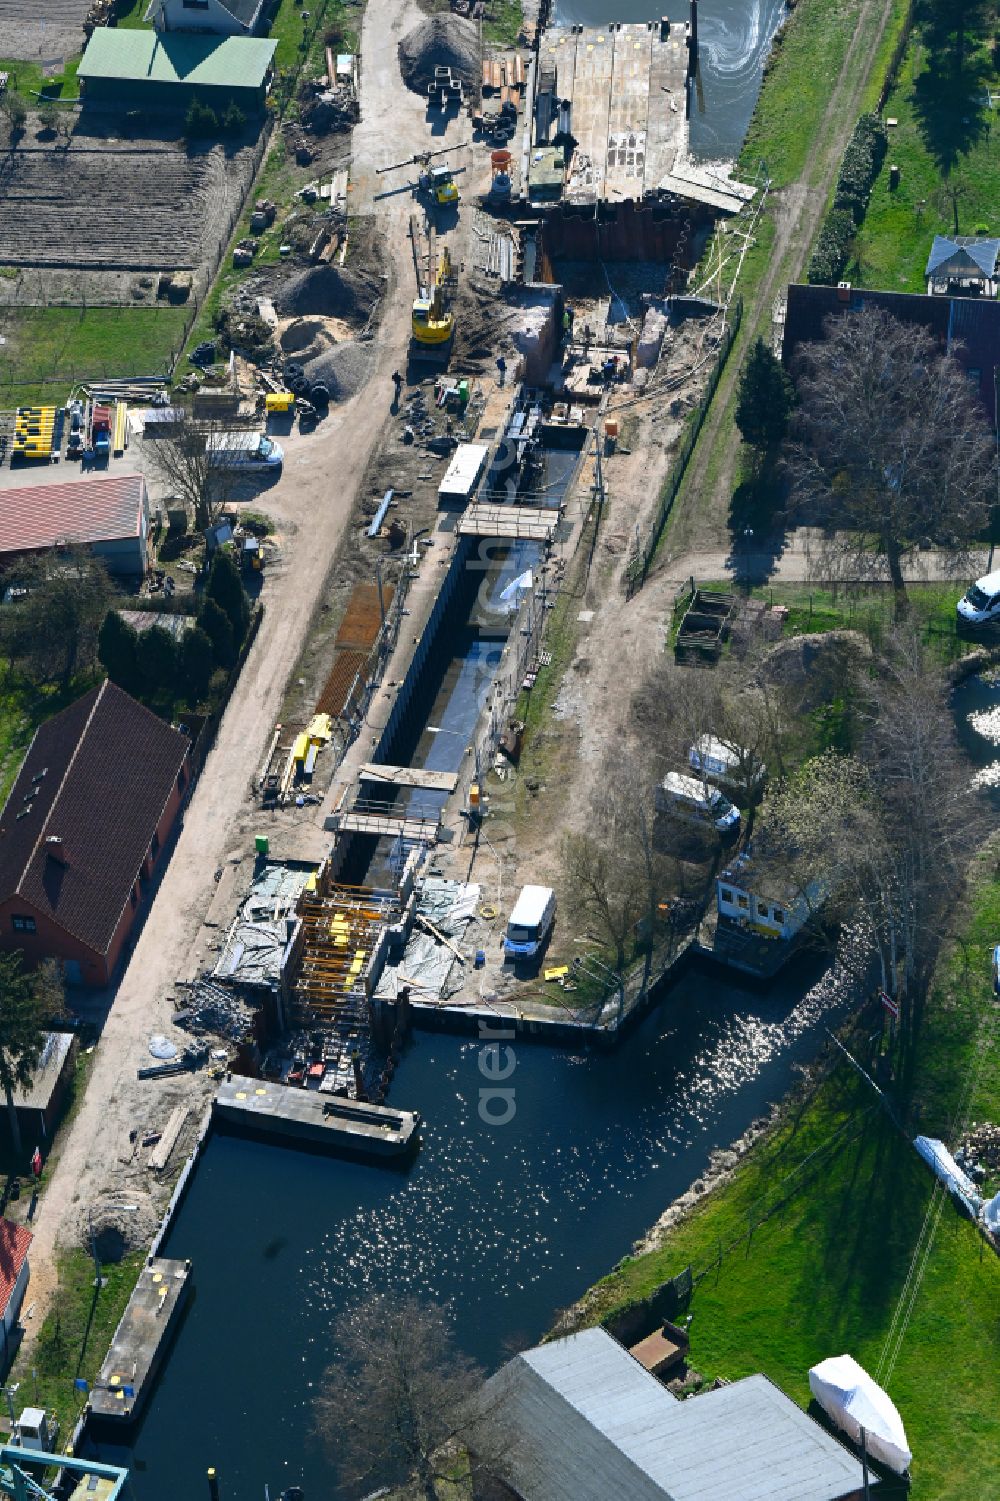 Banzkow from the bird's eye view: Construction site for the new construction and expansion of the lock systems and replacement construction of the weir system on the banks of the Stoerkanal waterway in Banzkow in the state Mecklenburg-West Pomerania, Germany